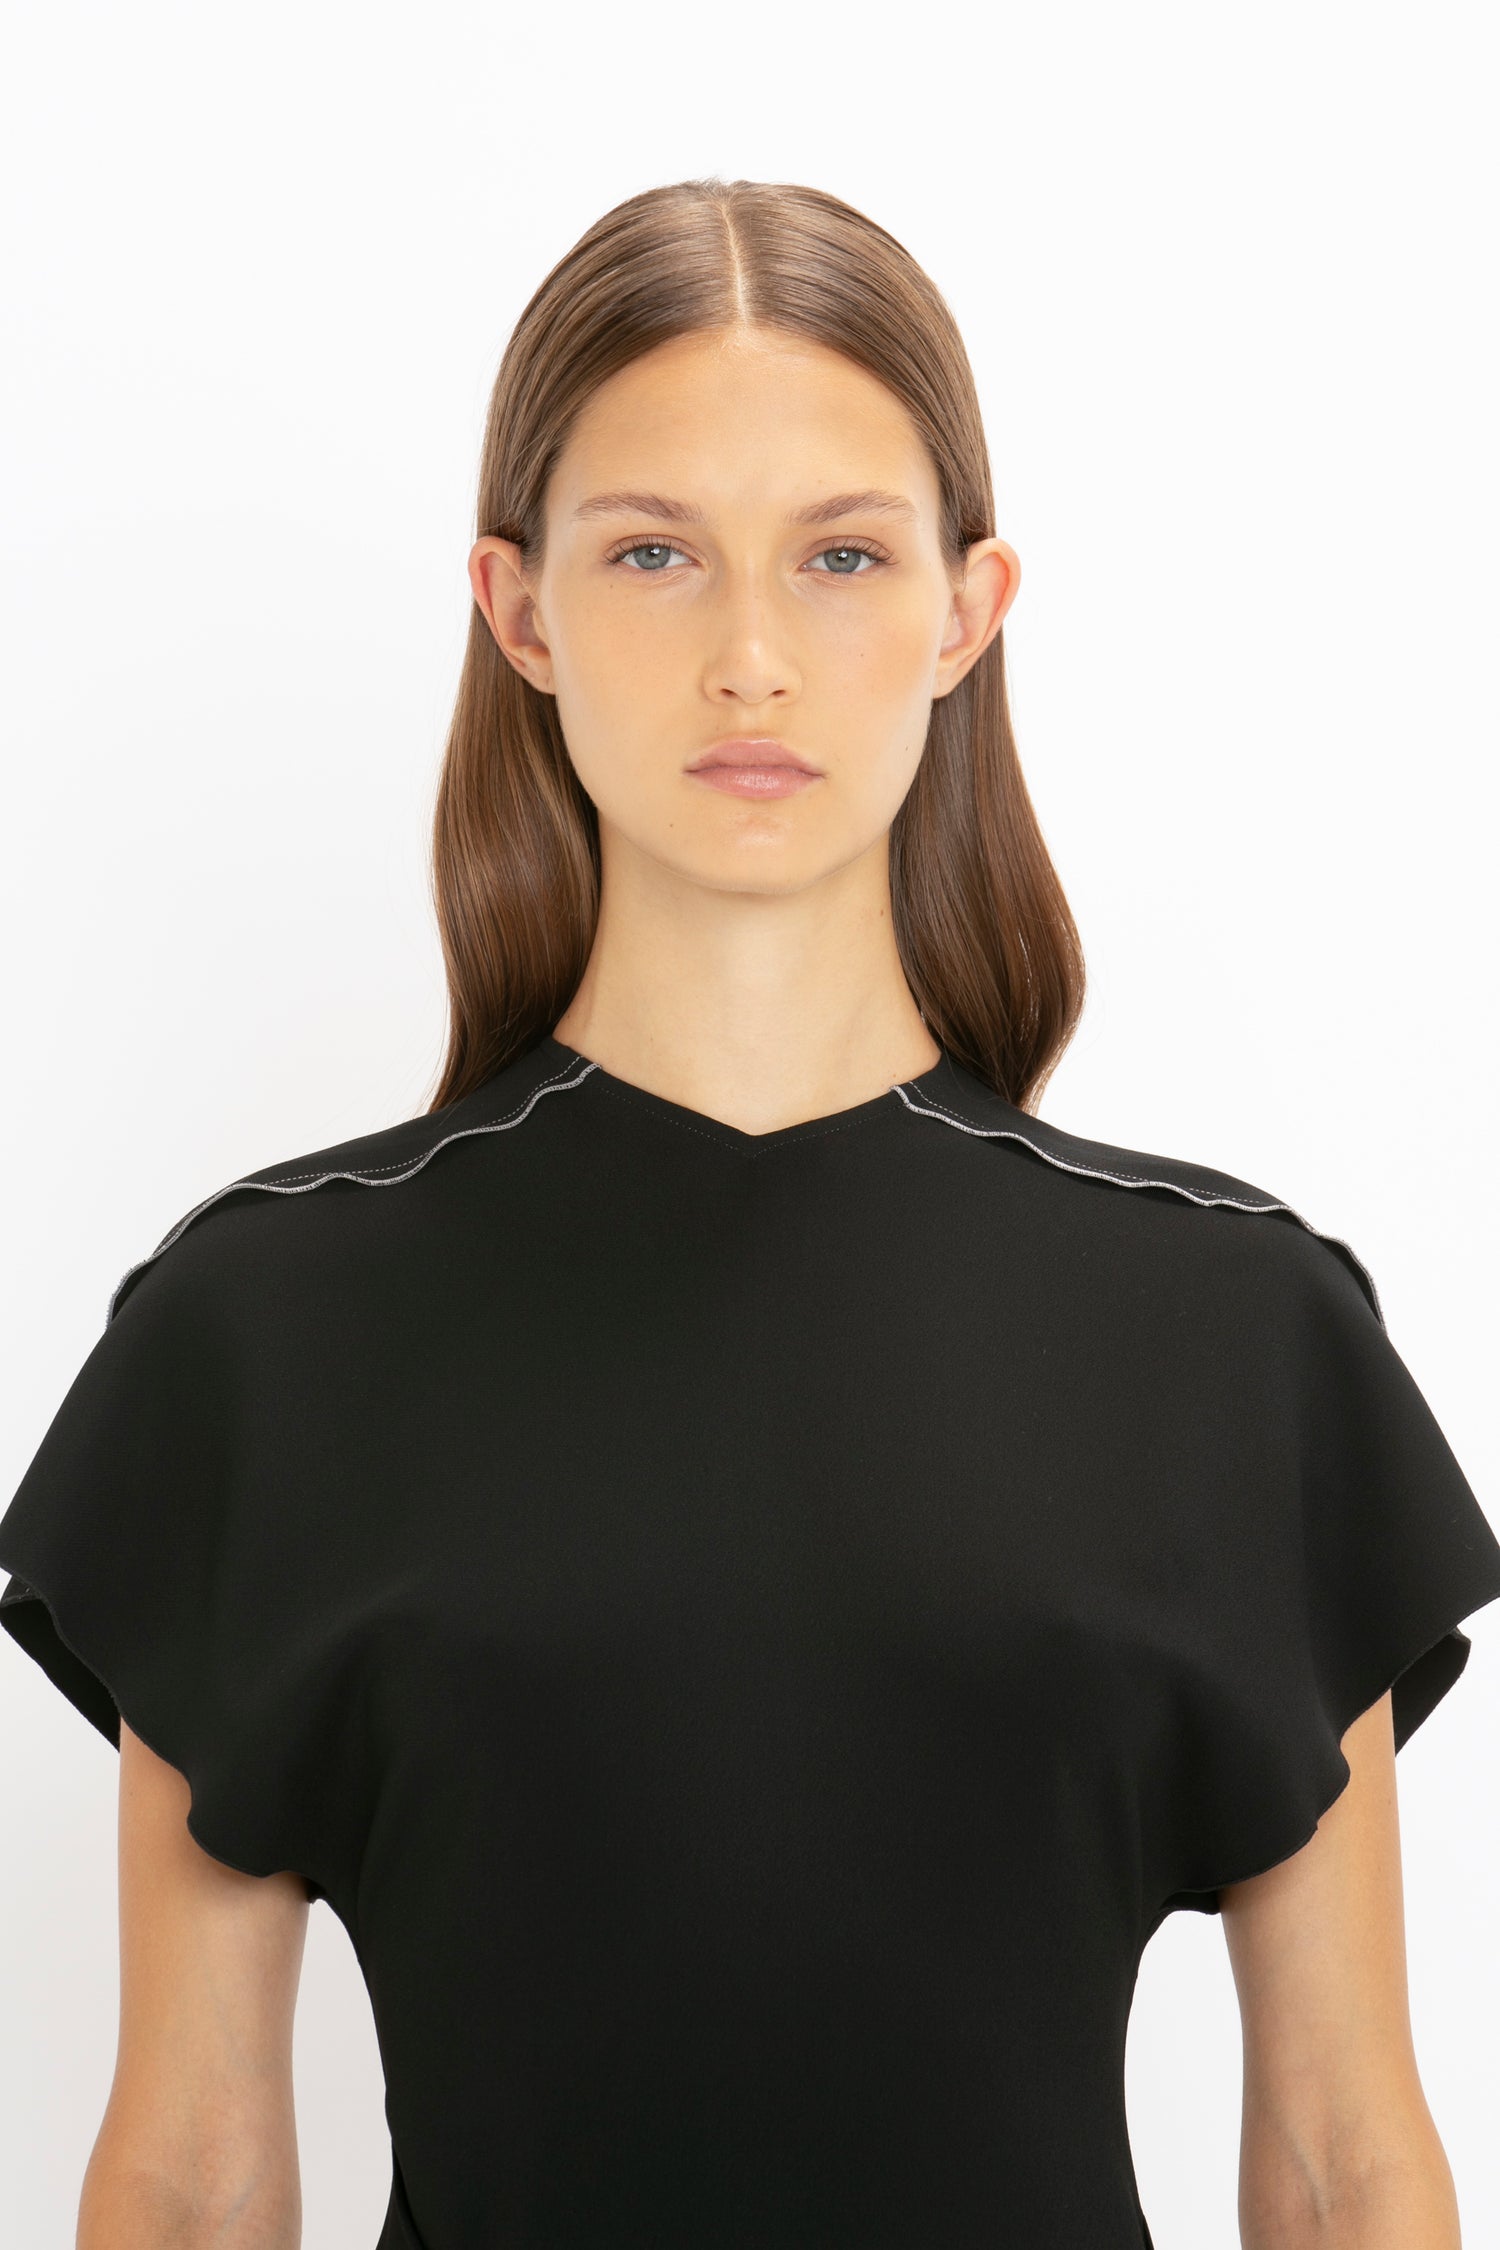 Portrait of a woman with straight brown hair and a Short Sleeve Tie Detail Dress In Black by Victoria Beckham, featuring a scalloped neckline and front-tie detail, against a white background.